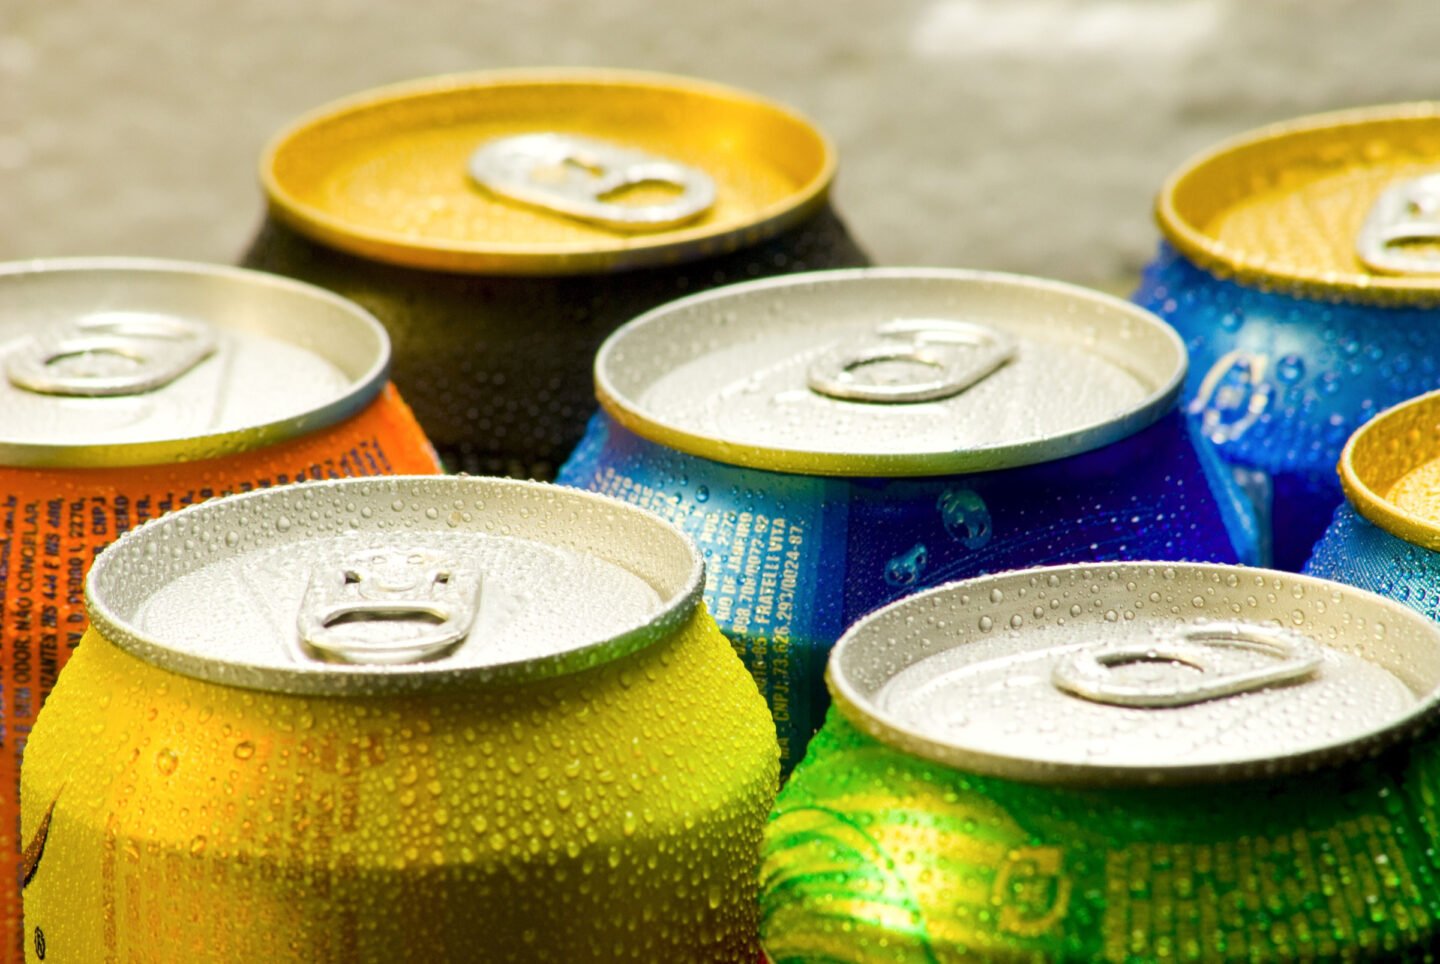 cold cans of soda sugary beverages